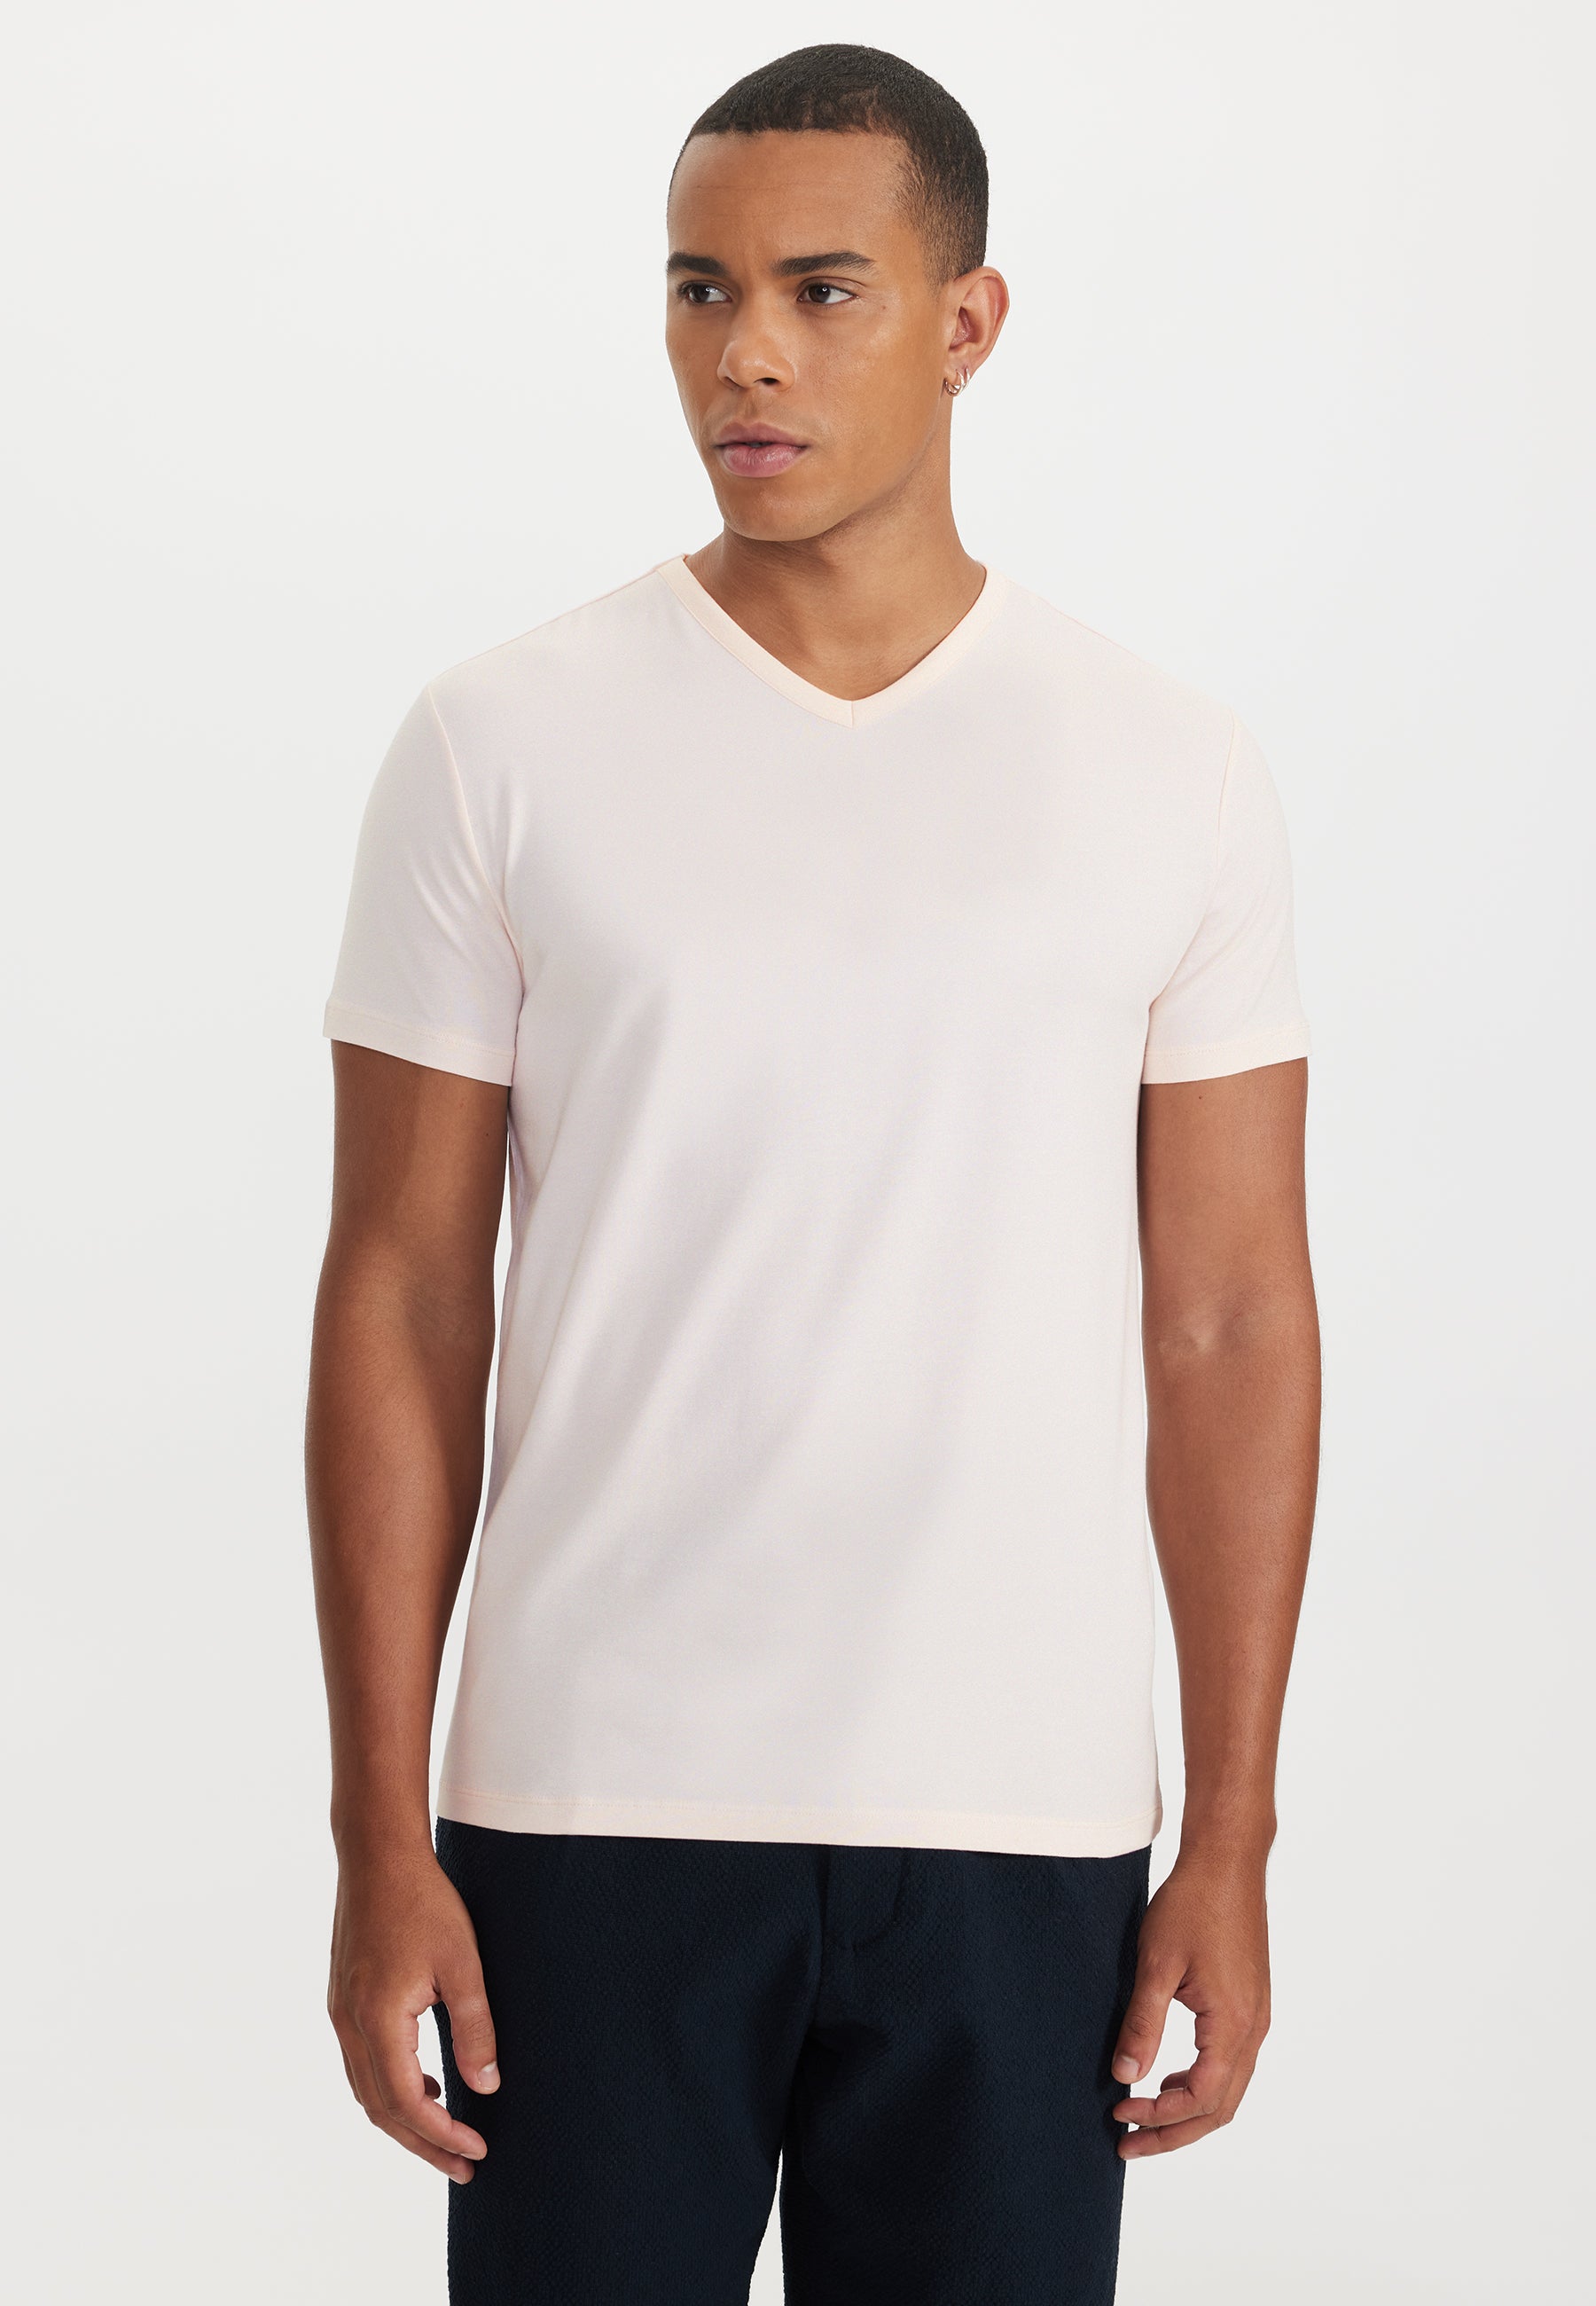 THEO V-NECK TEE in Salmon